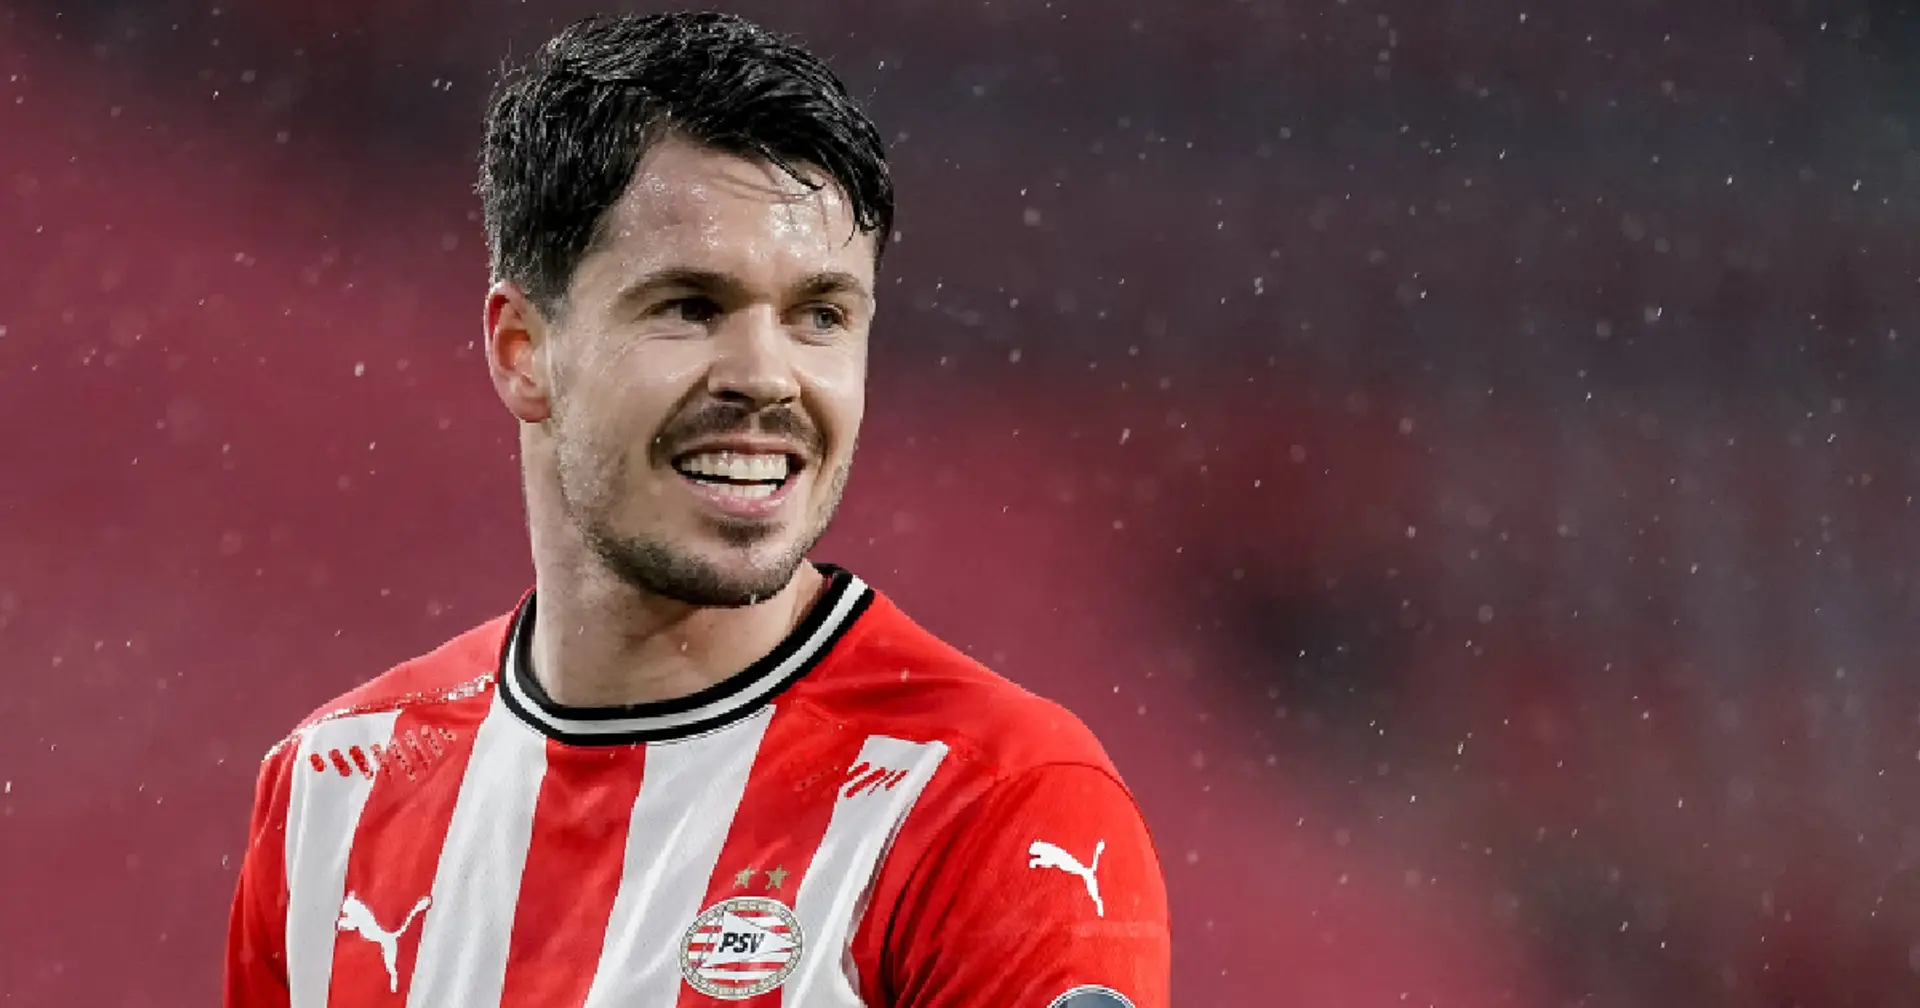 'I'm just happy to be a footballer again': Marco van Ginkel's inspirational recovery from horror injury